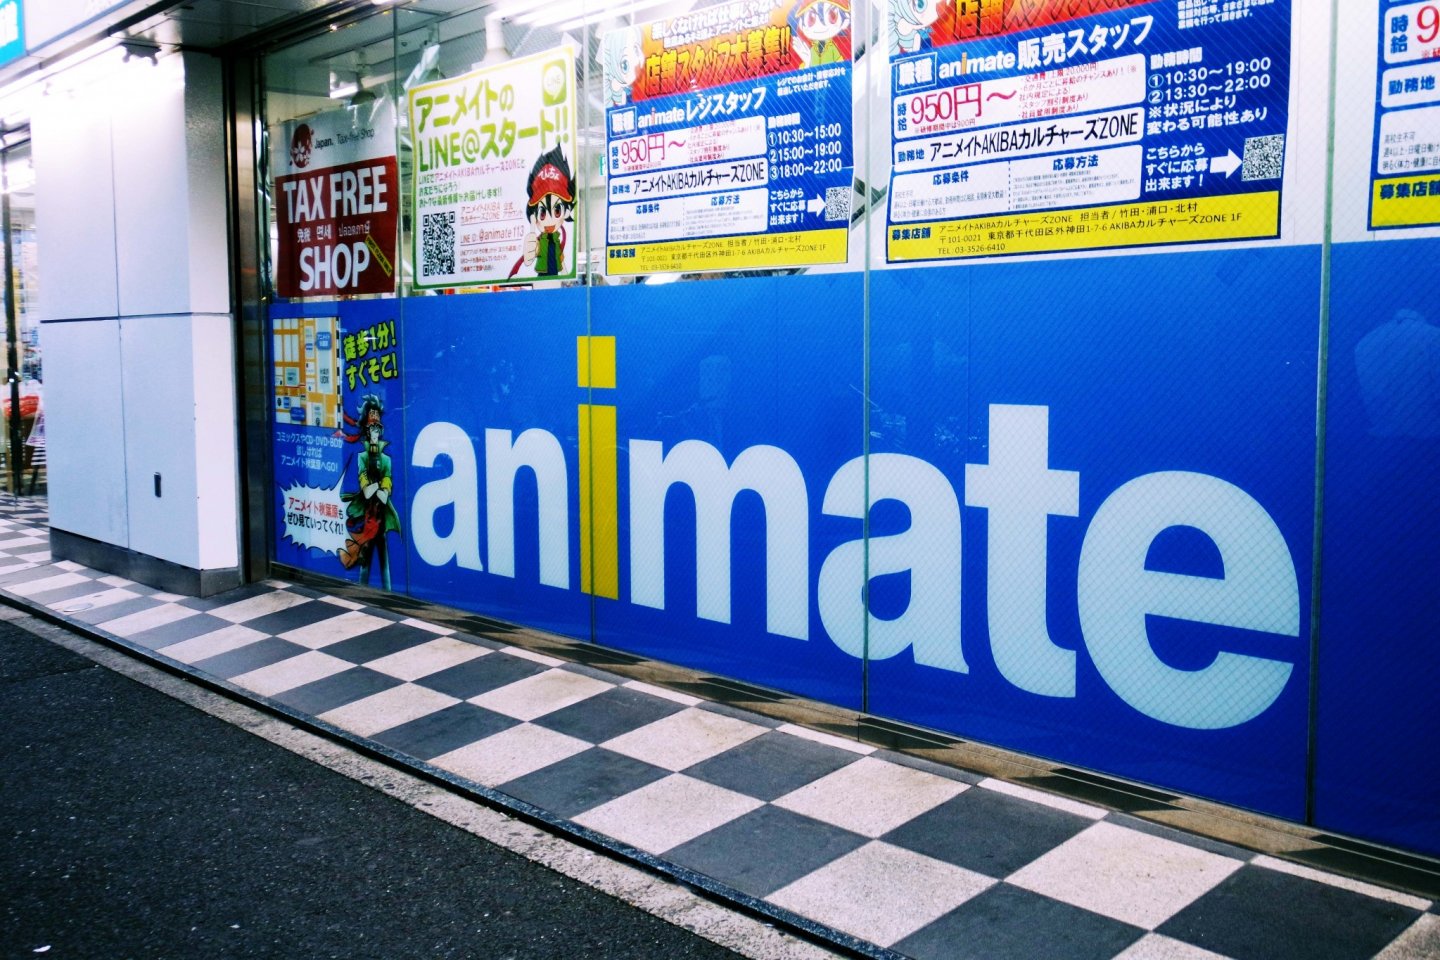 Look for the large "animate" sign outside the store! 